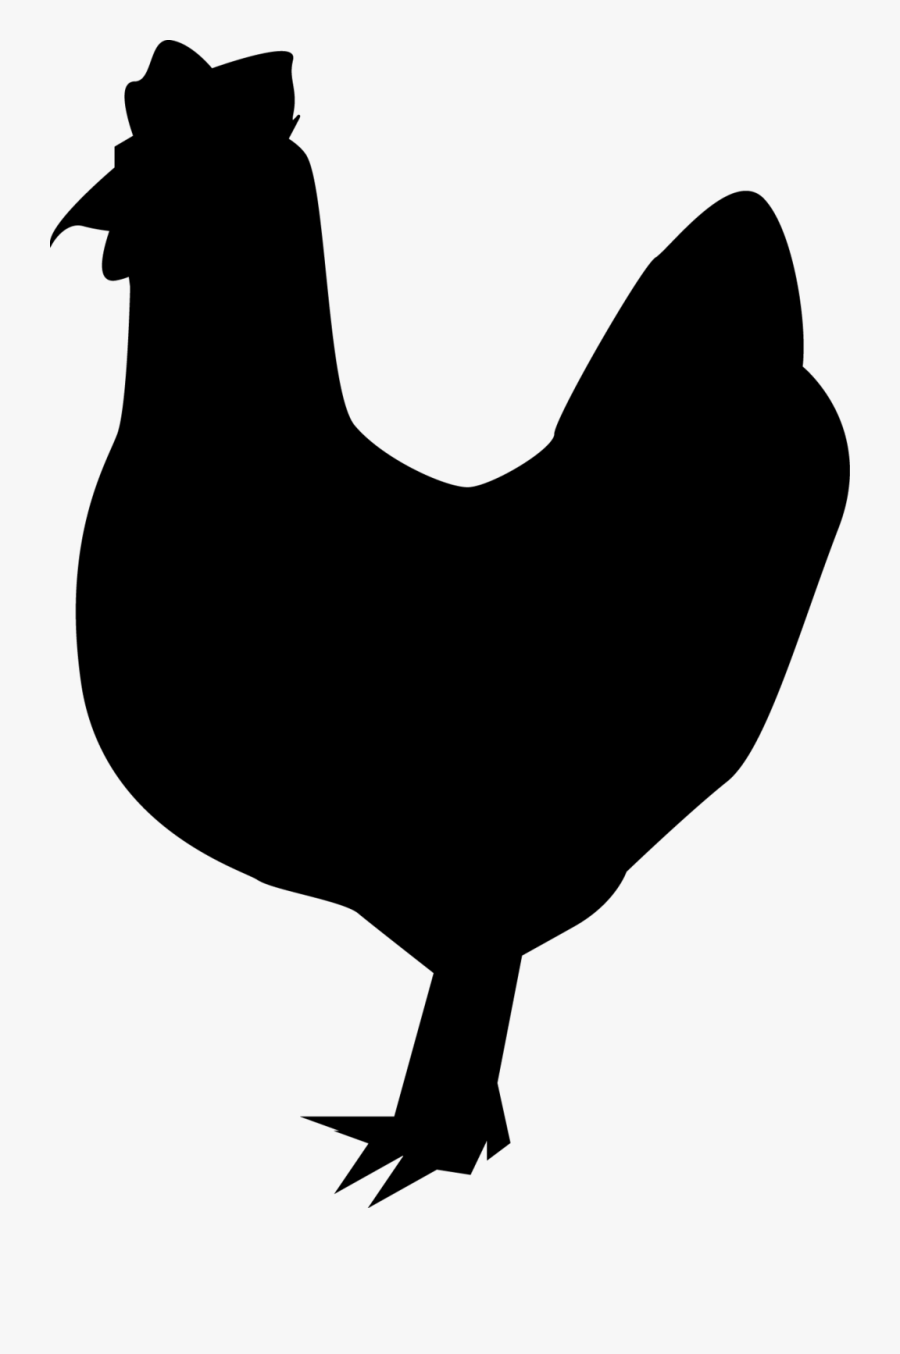 Free Chicken Silhouette By King Asriel - Silhouette Chicken Png Vector, Transparent Clipart